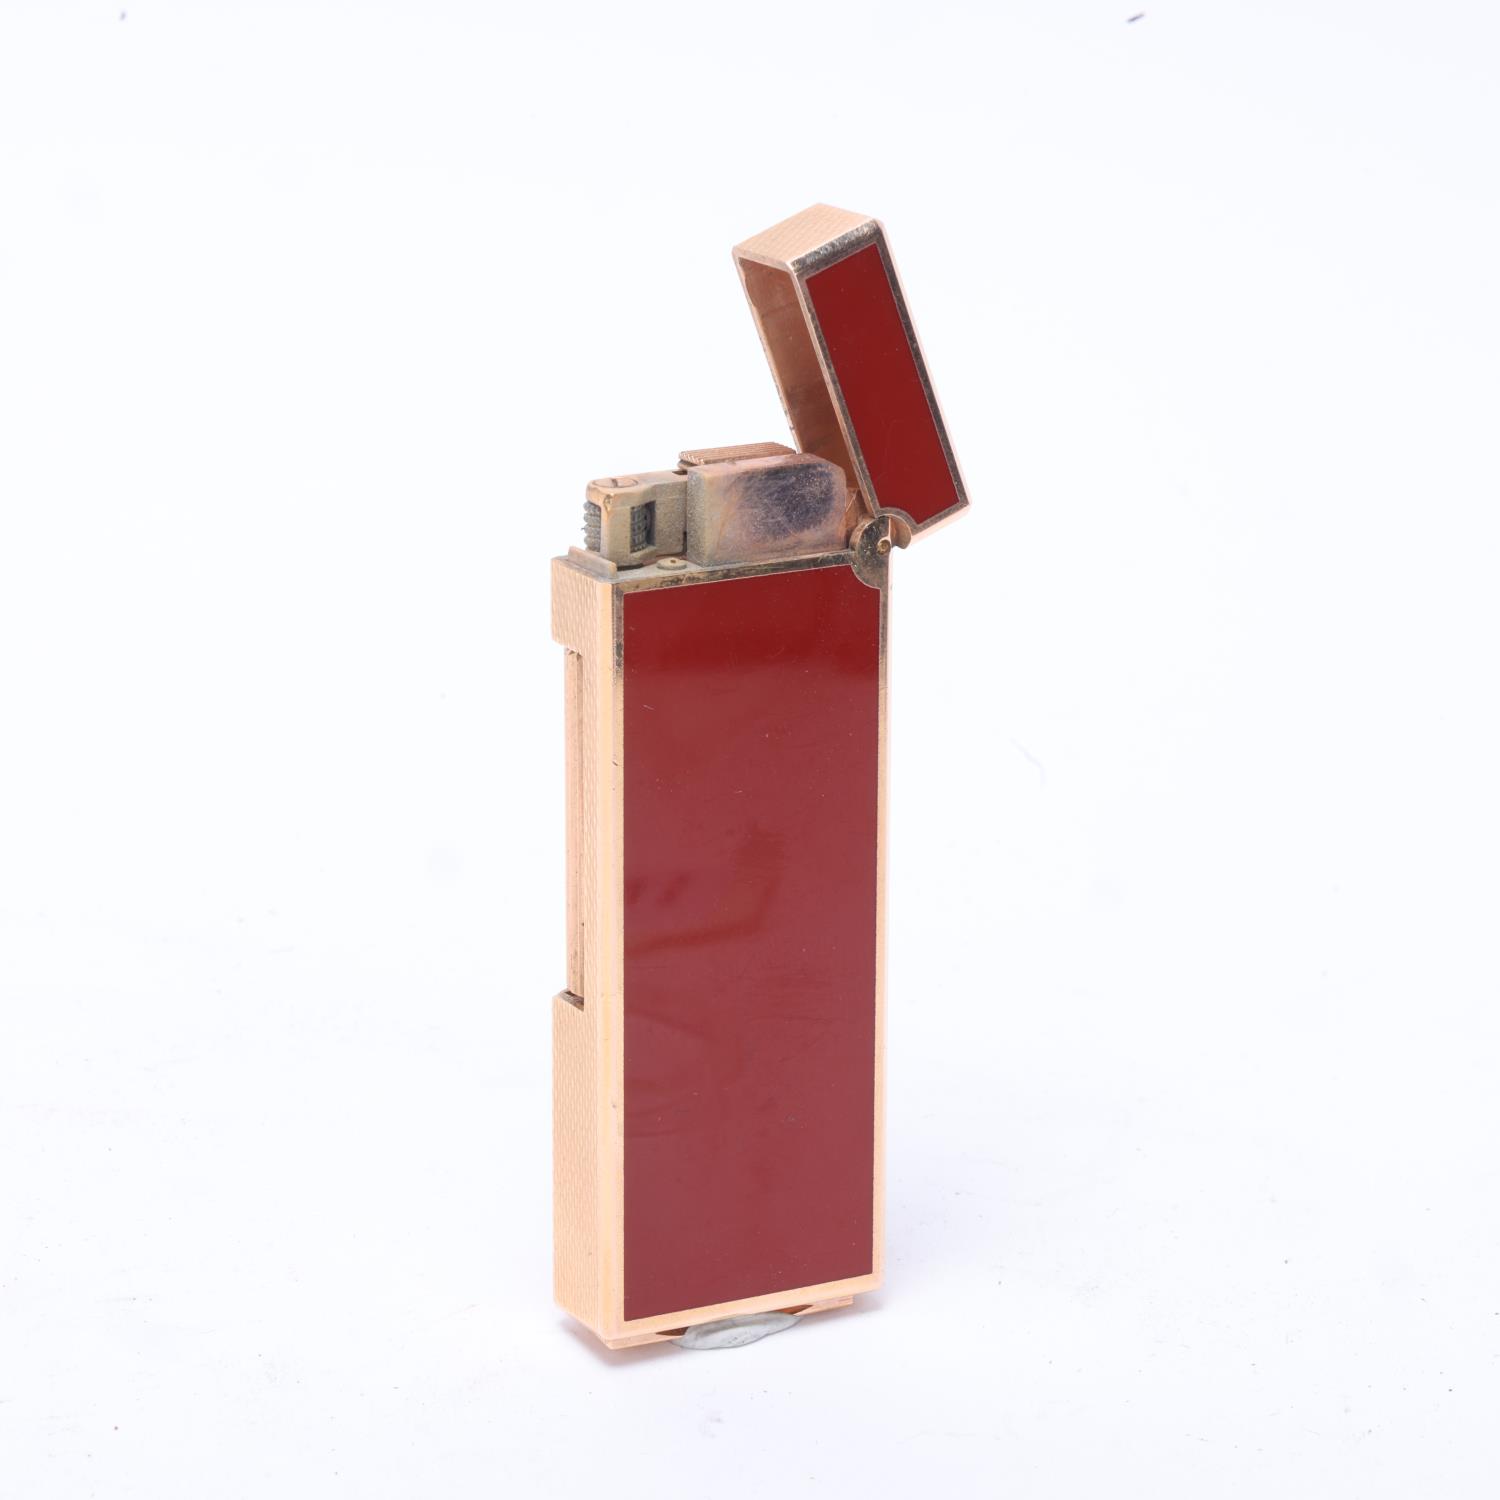 A Dunhill slimline Rollagas lighter, gold plated with red lacquer body, makers marks to base, - Image 2 of 4